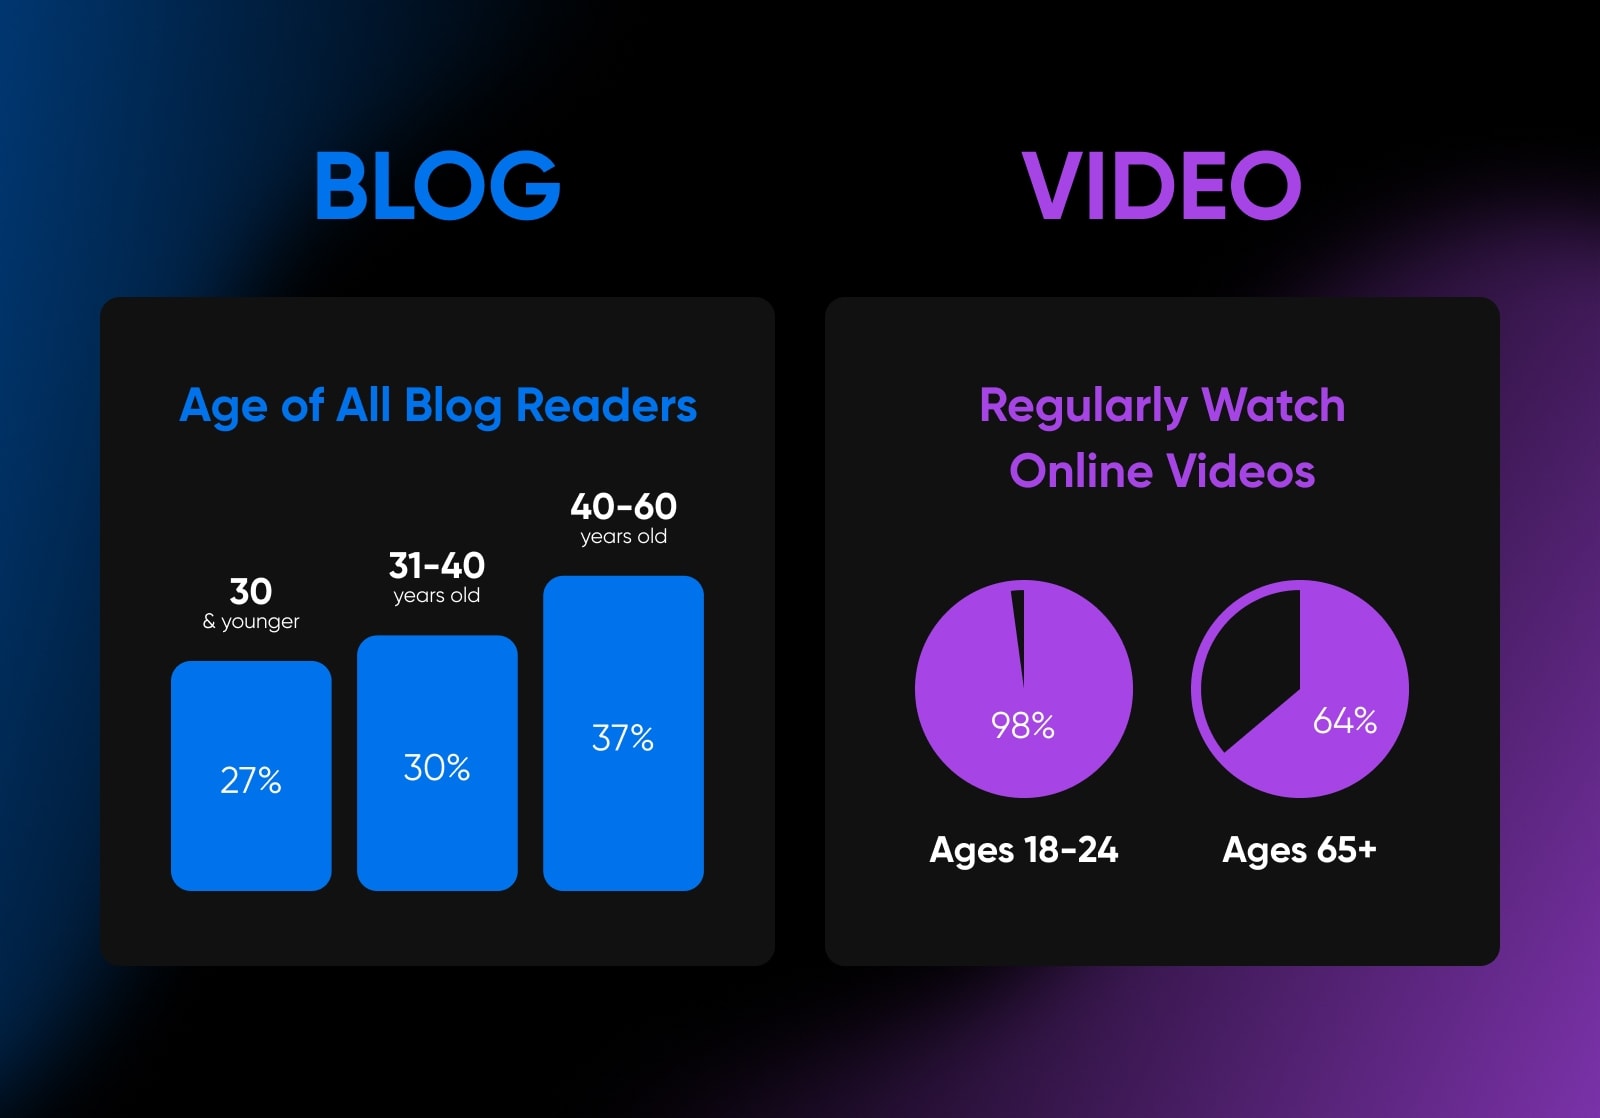 Ages of Blog Readers and Online Video Viewers